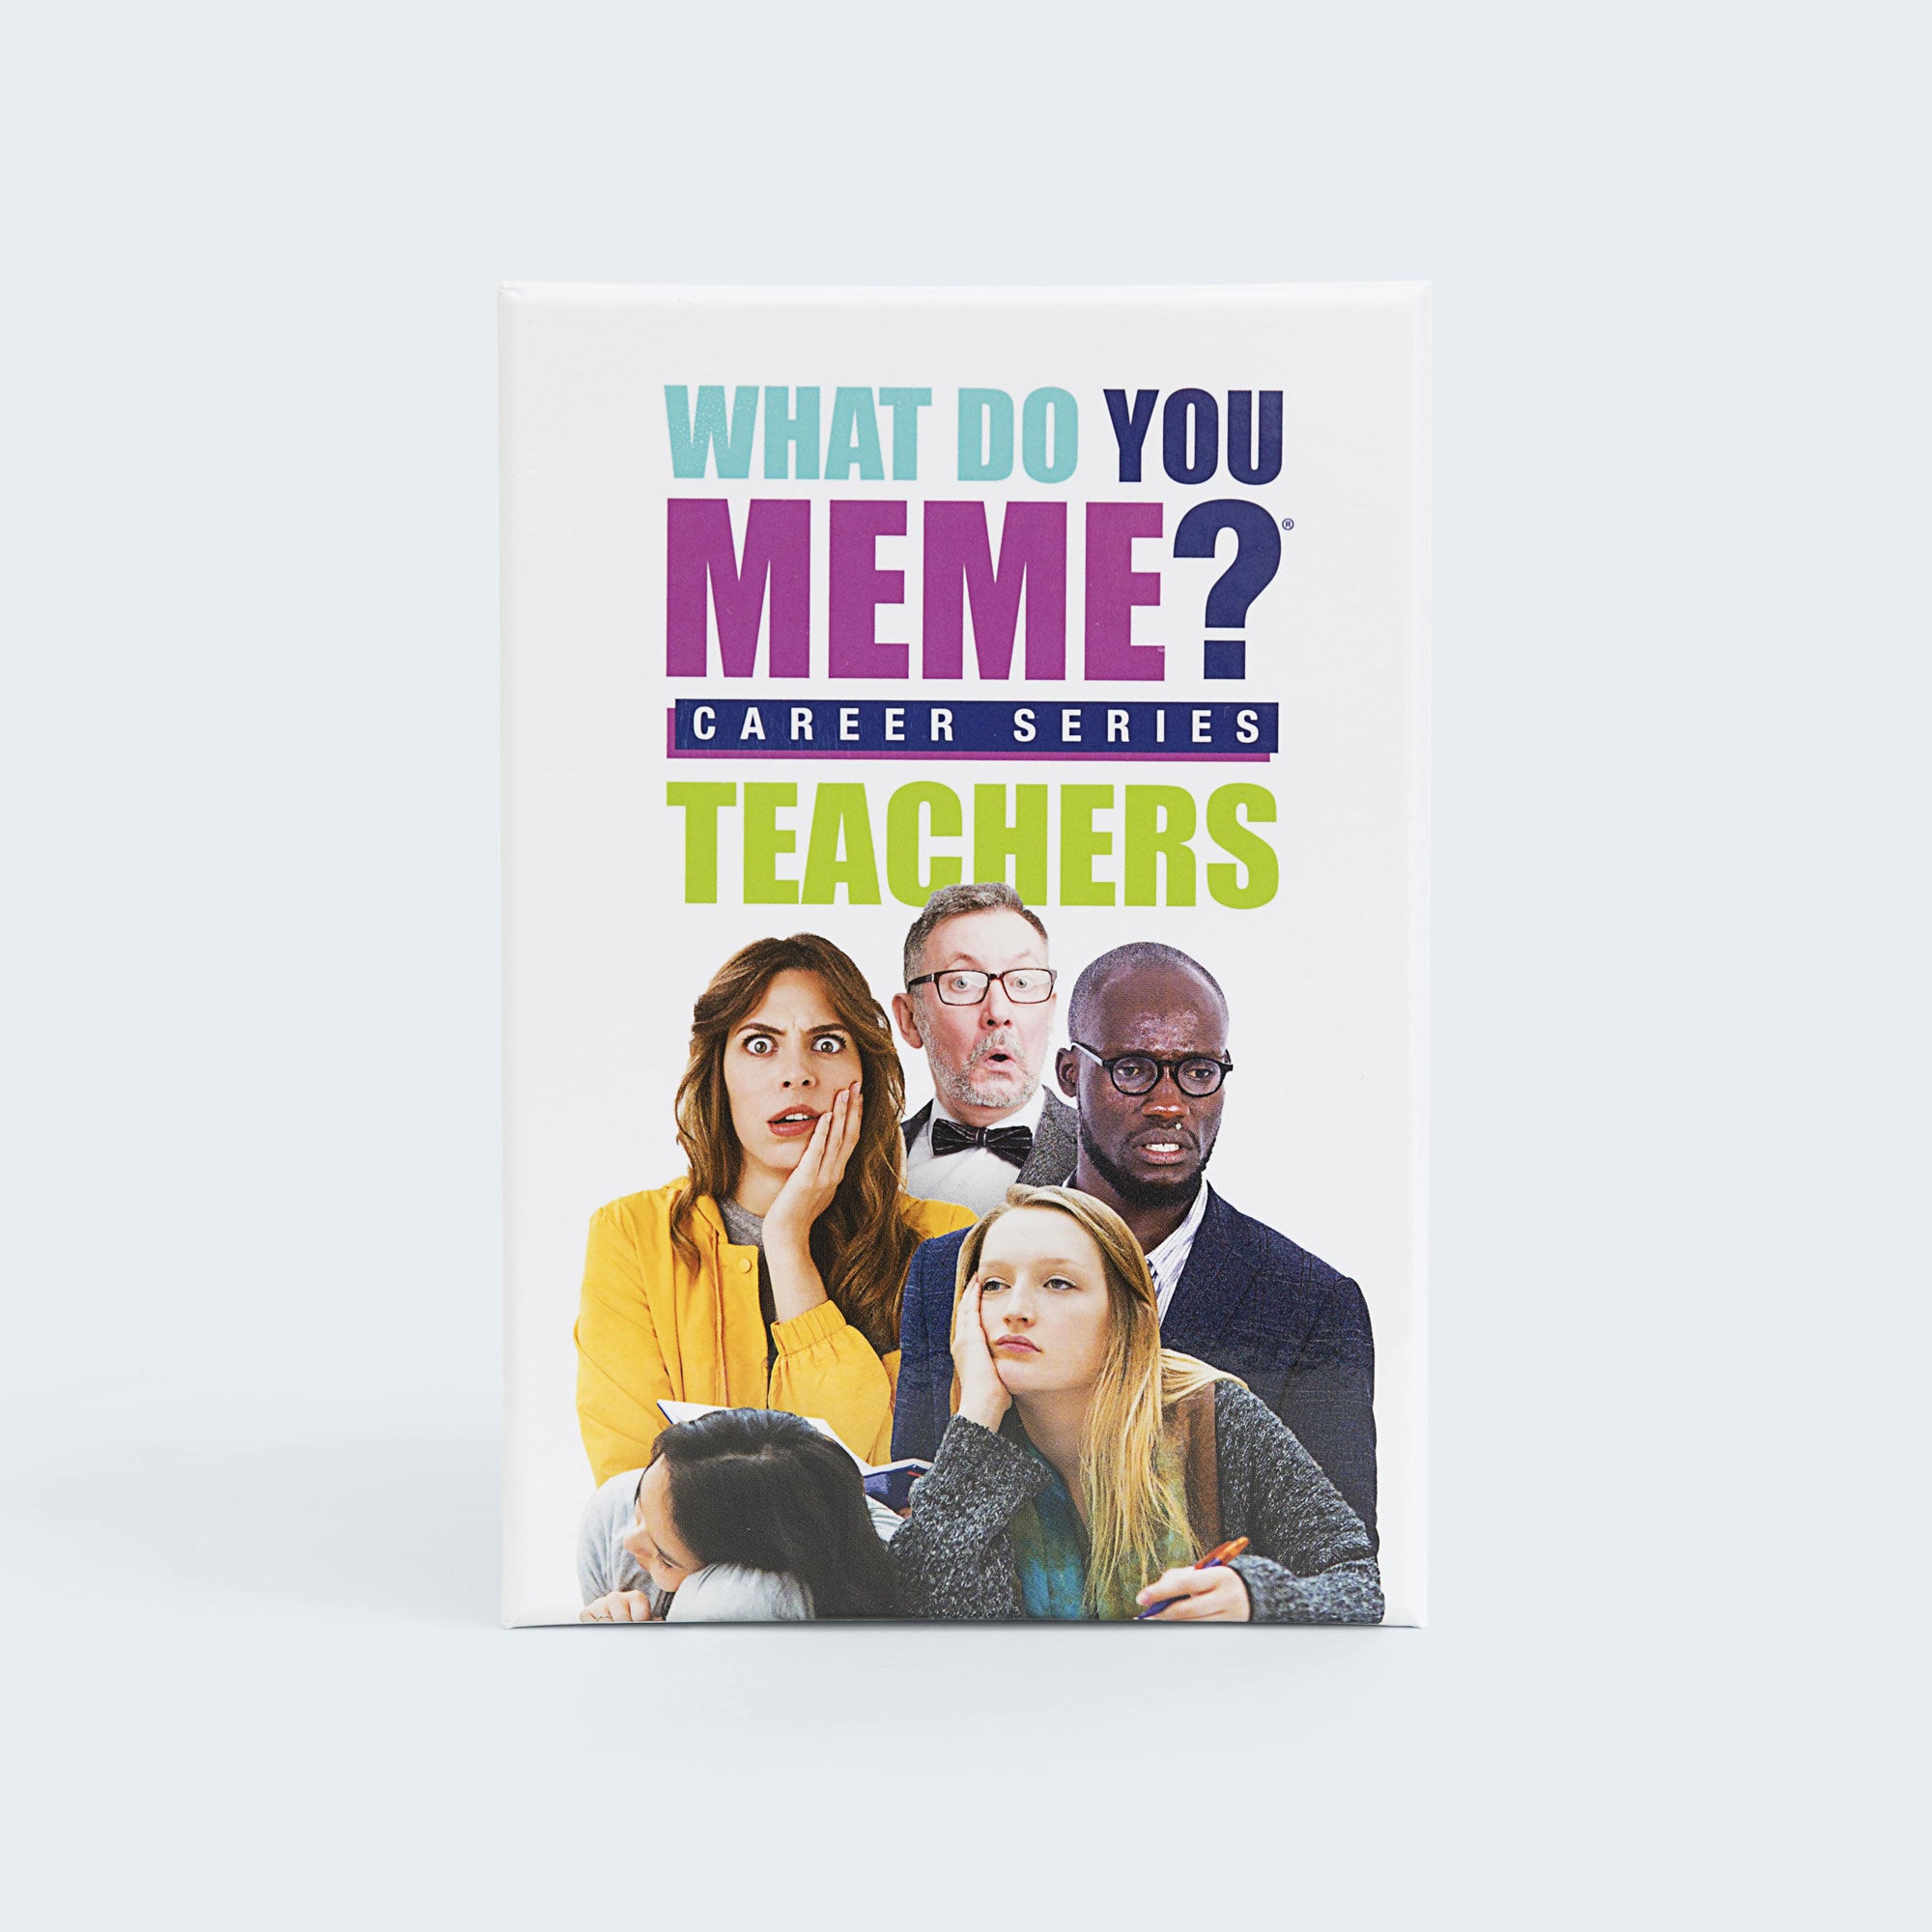 what-do-you-meme-career-series-teachers-game-box-and-game-play-04-what-do-you-meme-by-relatable